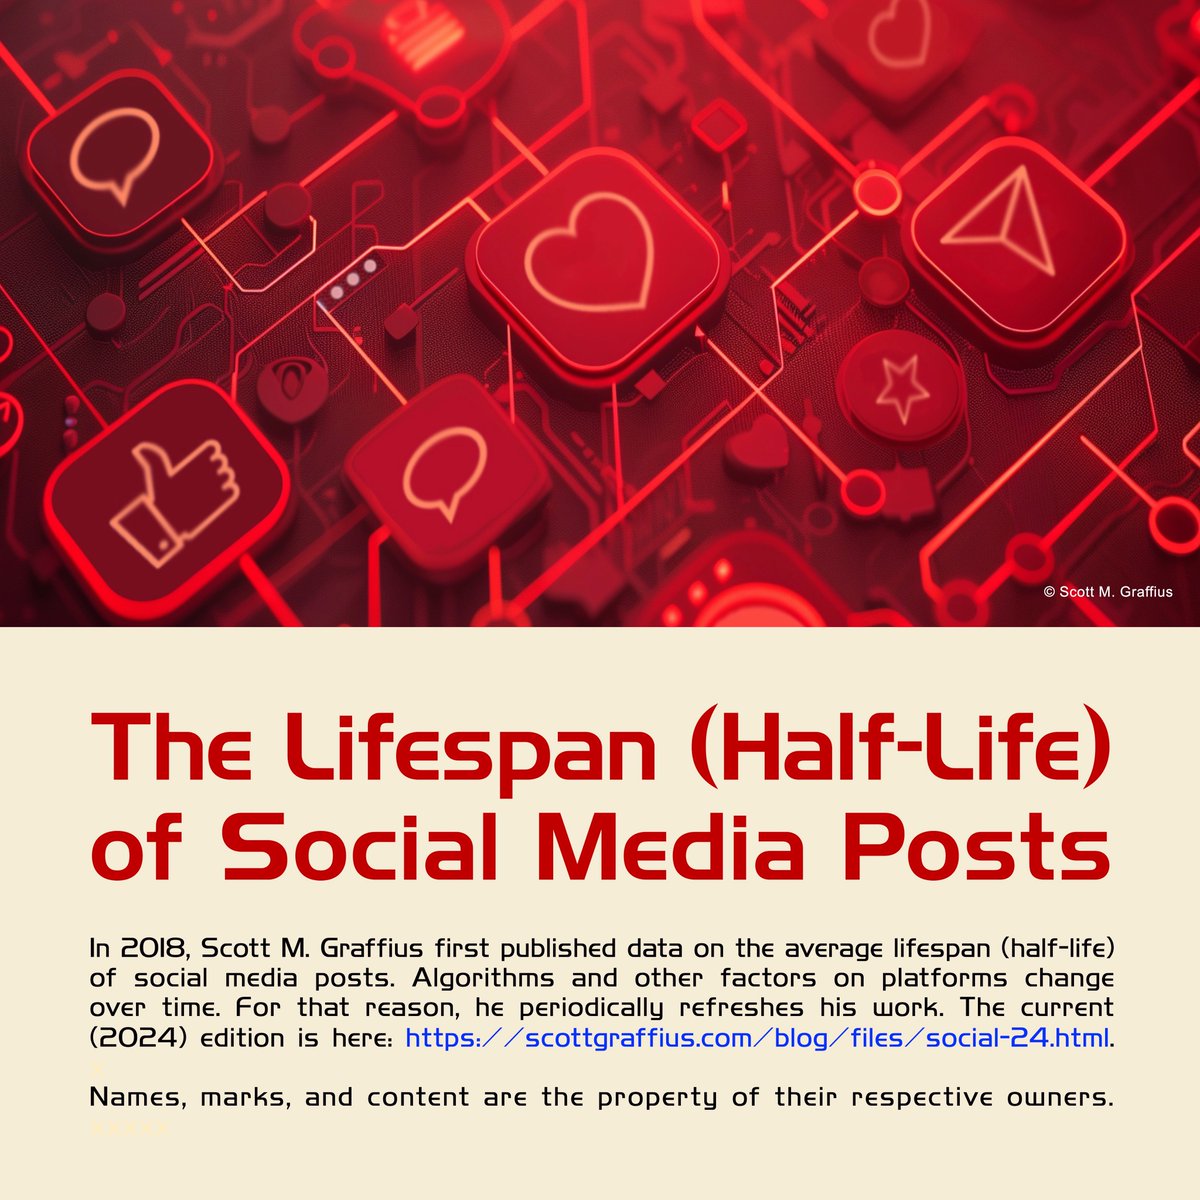 In 2018, I first published data on the average lifespan (half-life) of social media posts. #Algorithms and other factors on #socialmedia platforms change over time. For that reason, I periodically refresh my work. The current (2024) edition is here: scottgraffius.com/blog/files/soc….